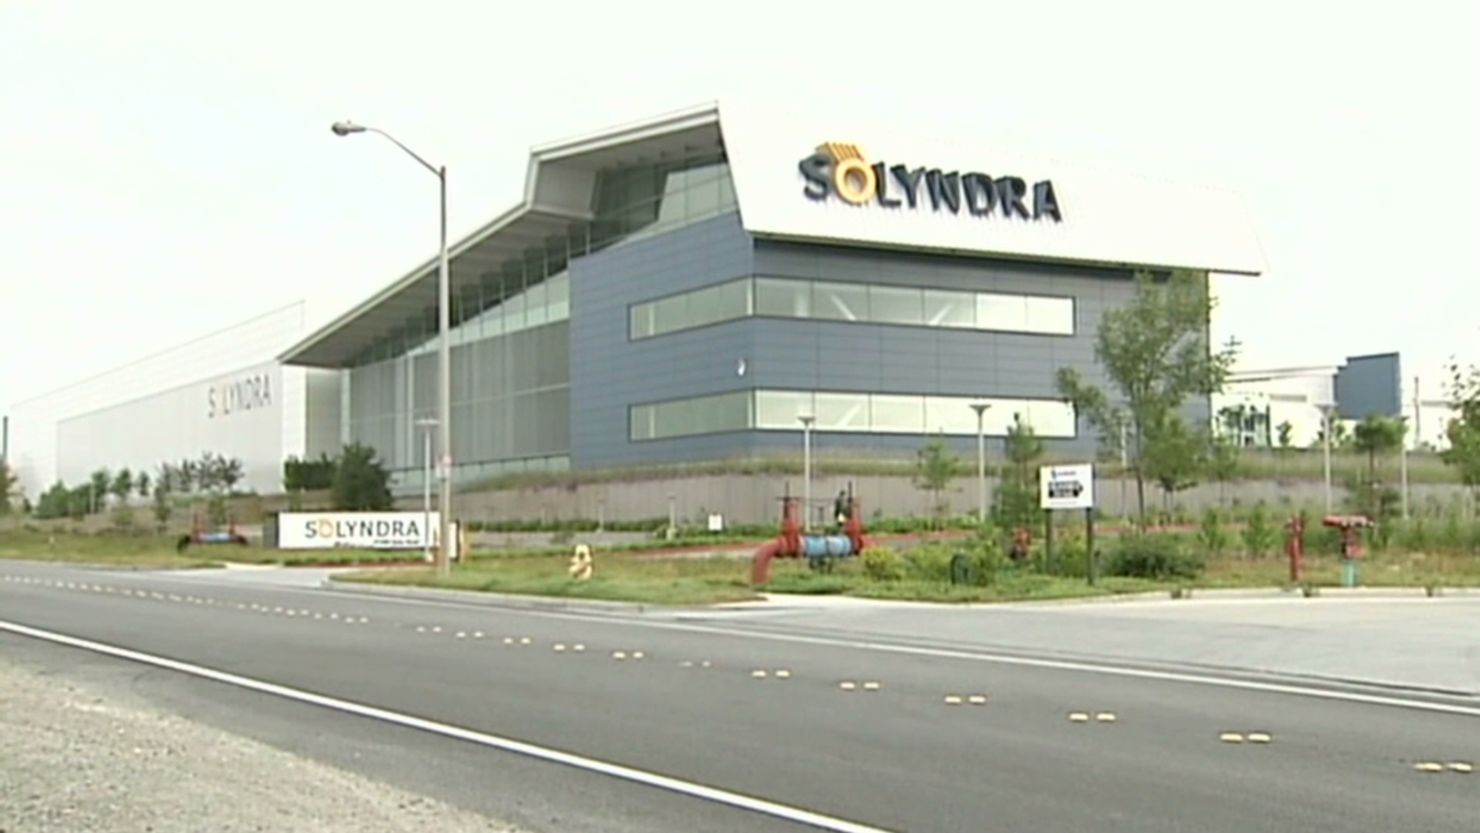  The head of the Loan Program Office has resigned amid the controversy over Solyndra's bankruptcy .